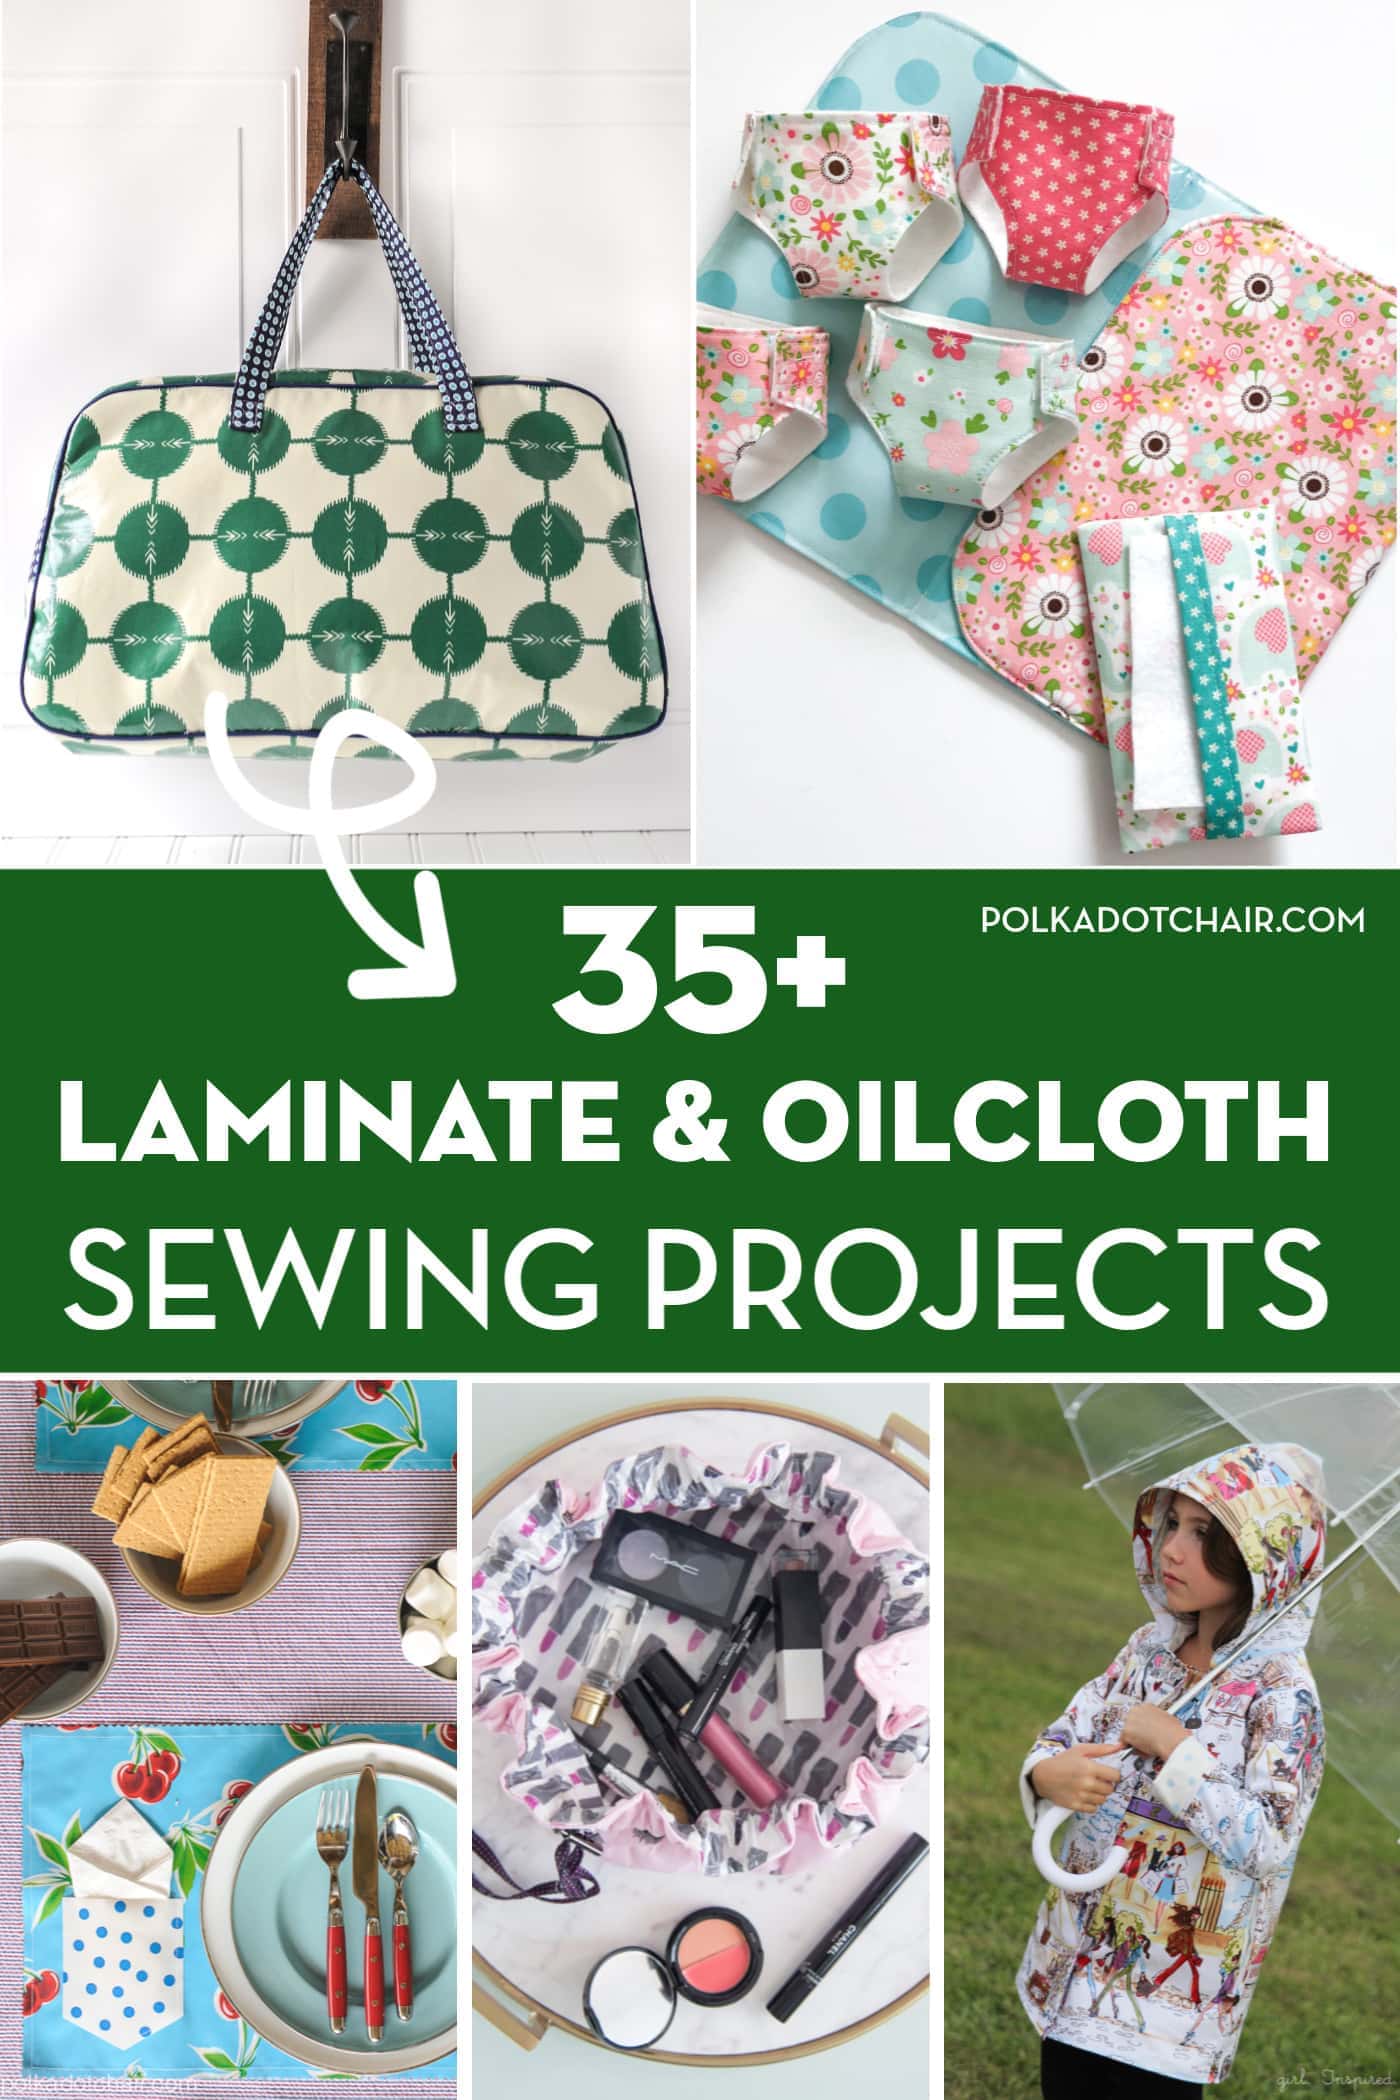 7 simple sewing projects to make this weekend - Ameroonie Designs